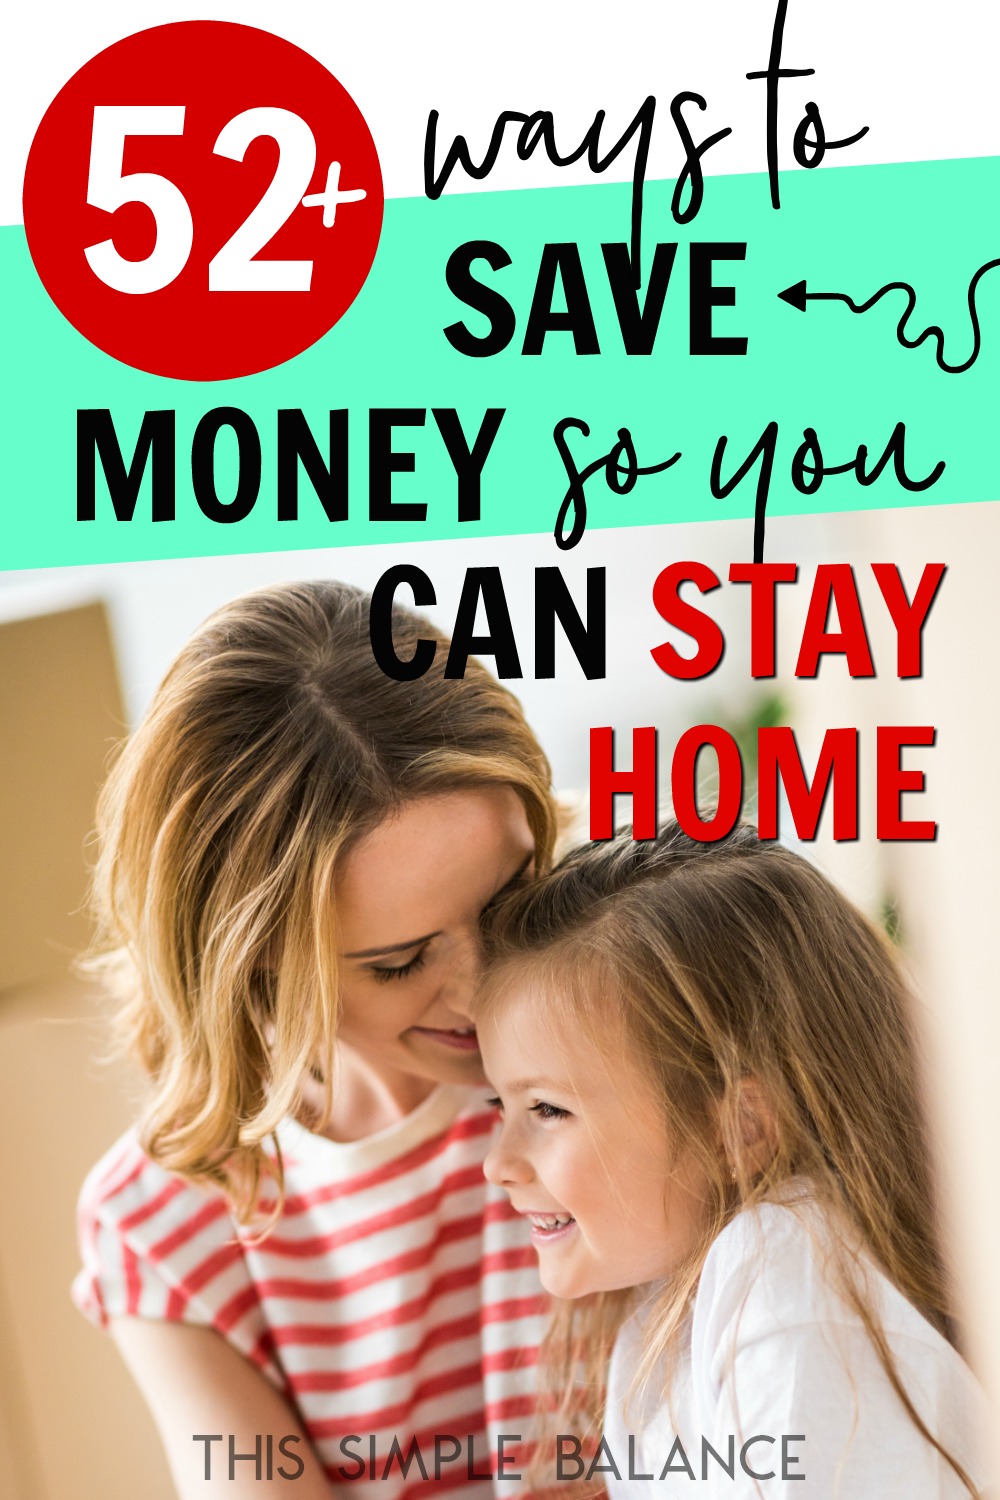 smiling stay at home mom snuggling with smiling child, with text overlay "52 ways to save money so you can stay home"